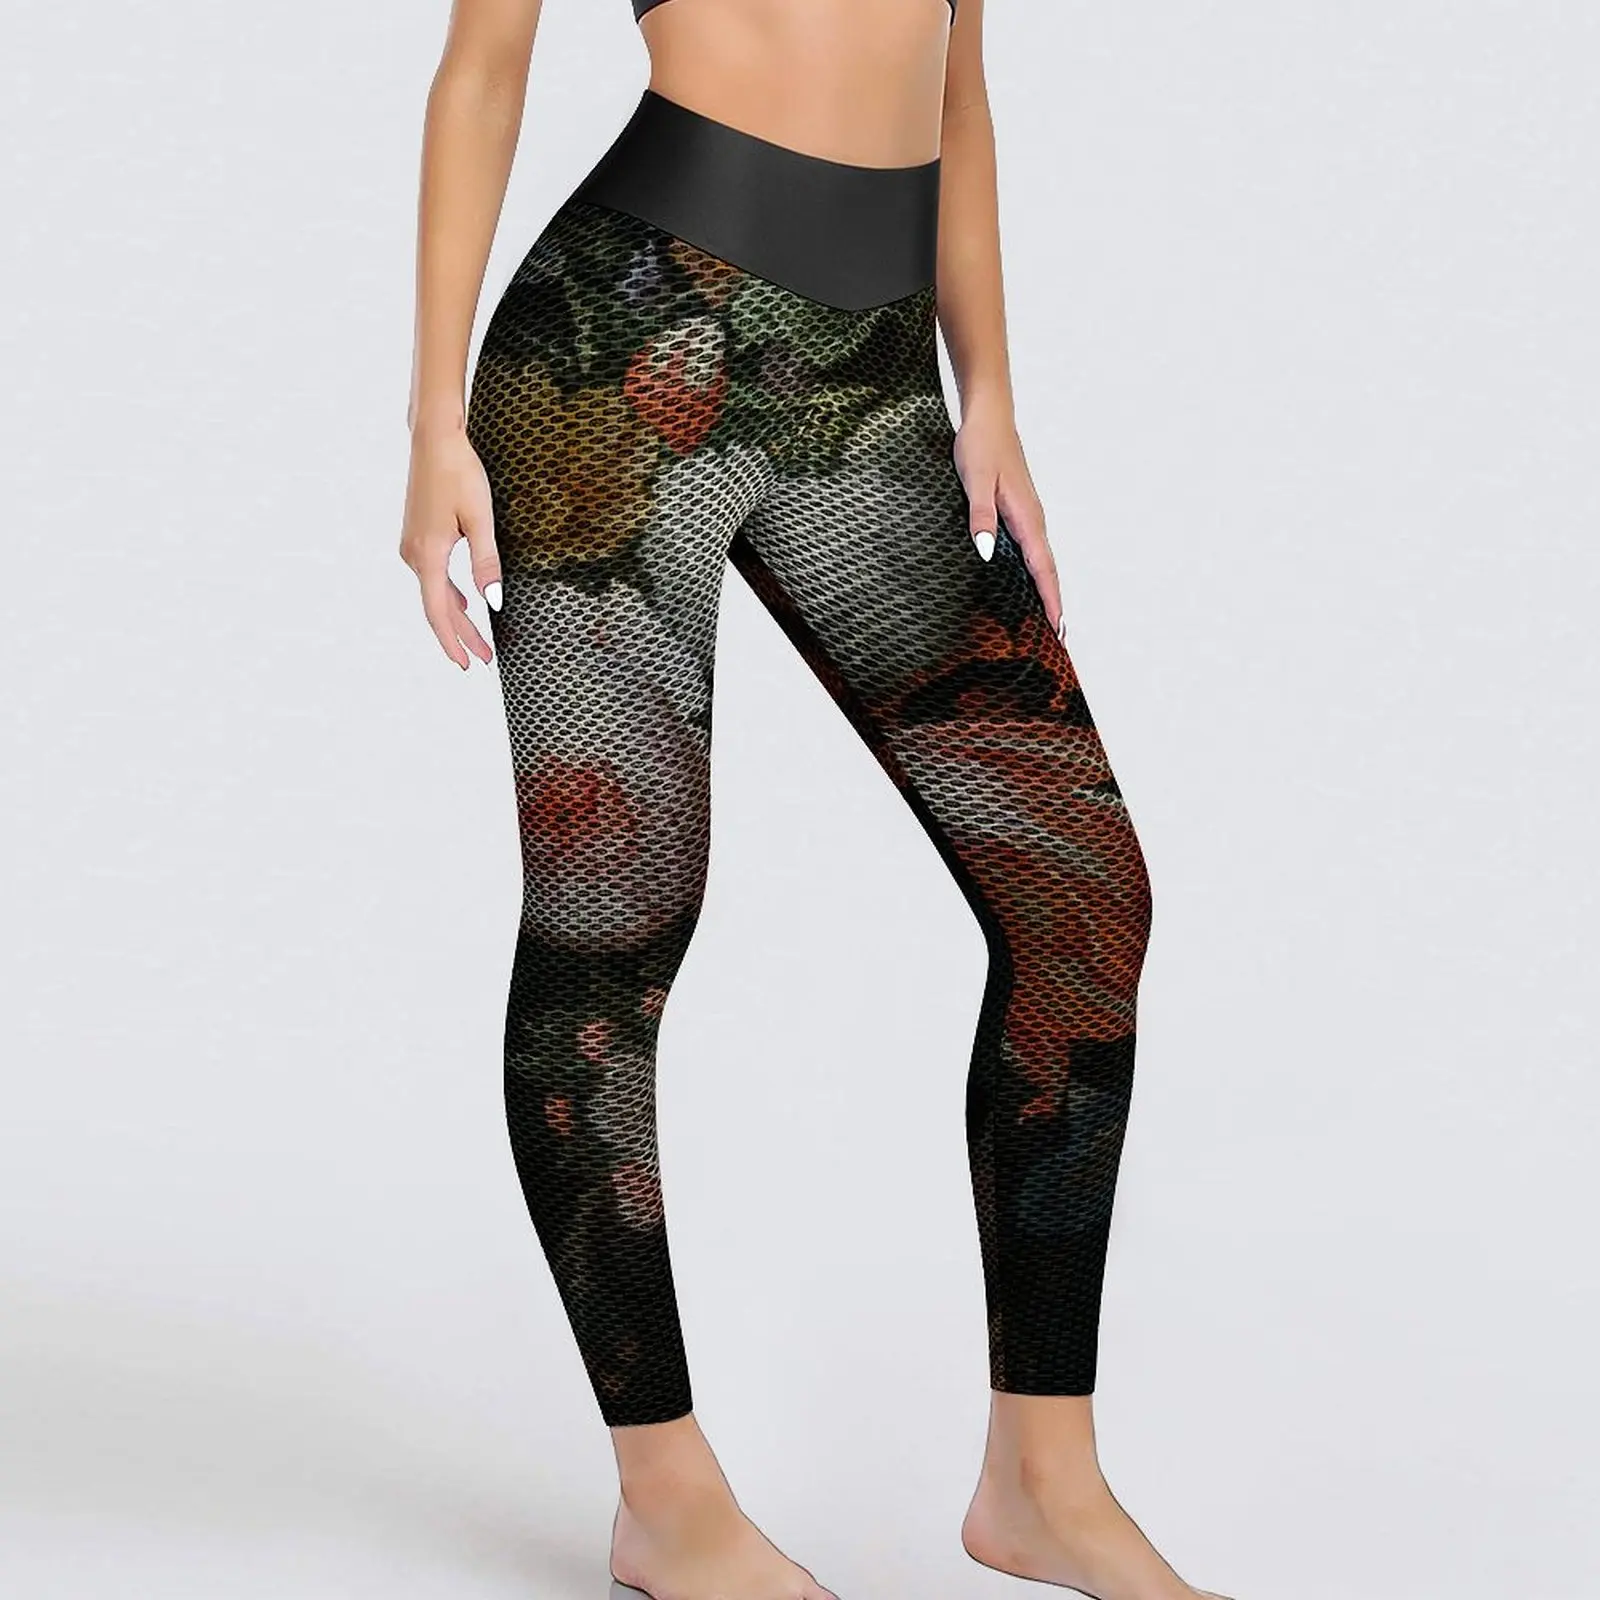 Bouquet Of Flower Leggings Sexy Colorful Floral Print Fitness Yoga Pants Seamless Sports Tights Women Breathable Graphic Leggins